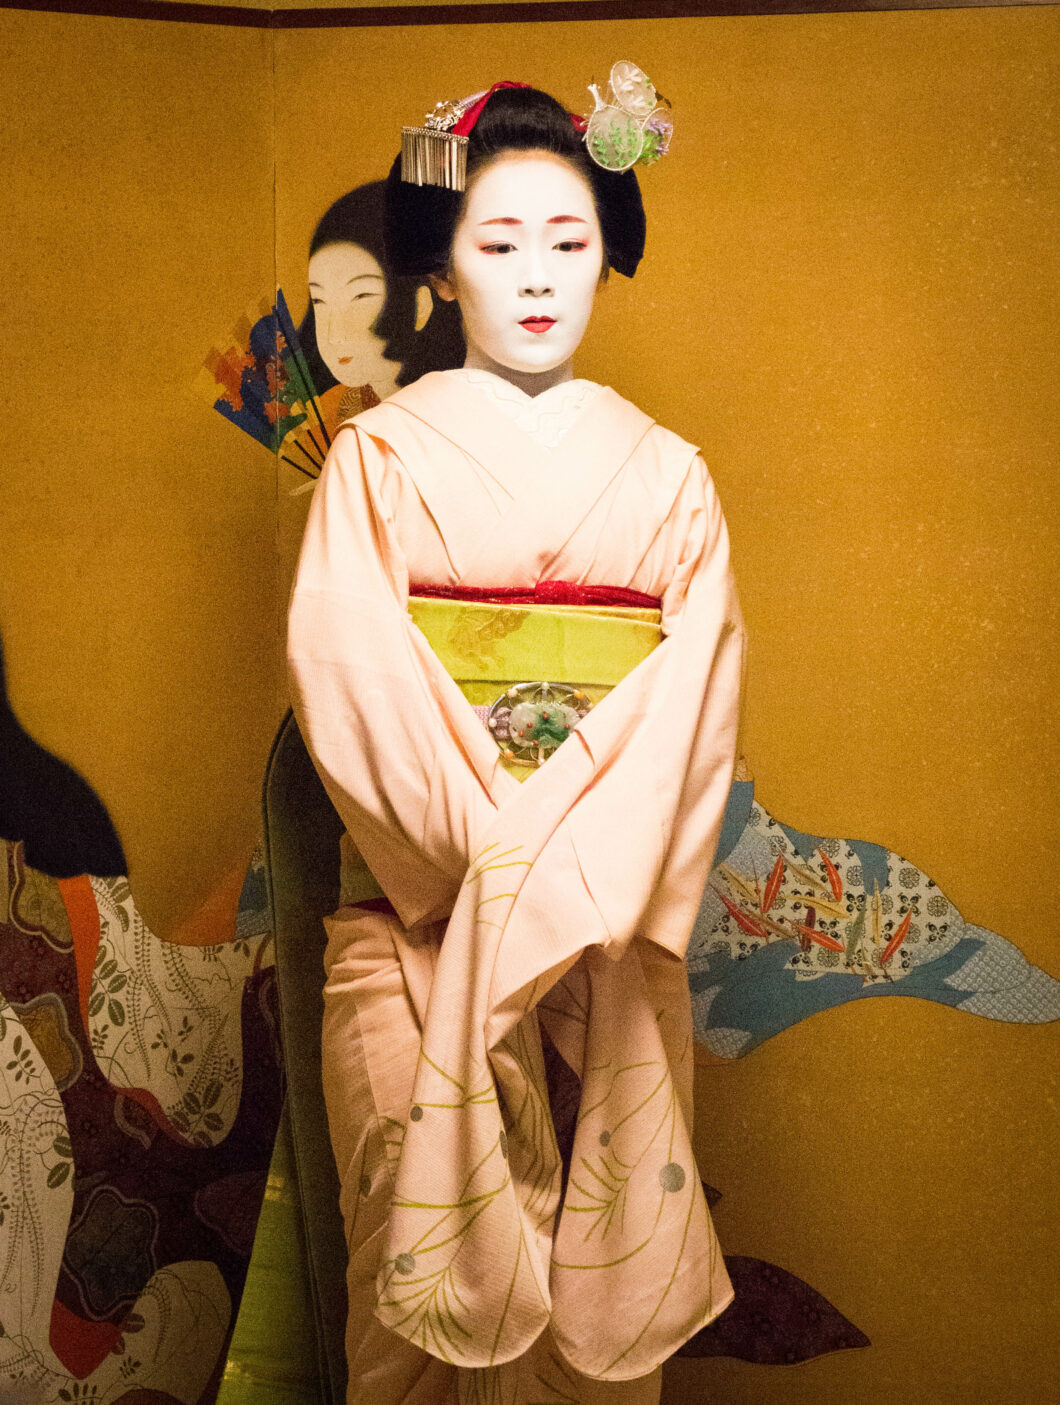 A young, stoic-faced Japanese Maiko stands against a yellow background. She's wearing traditional Geisha makeup and clothing.